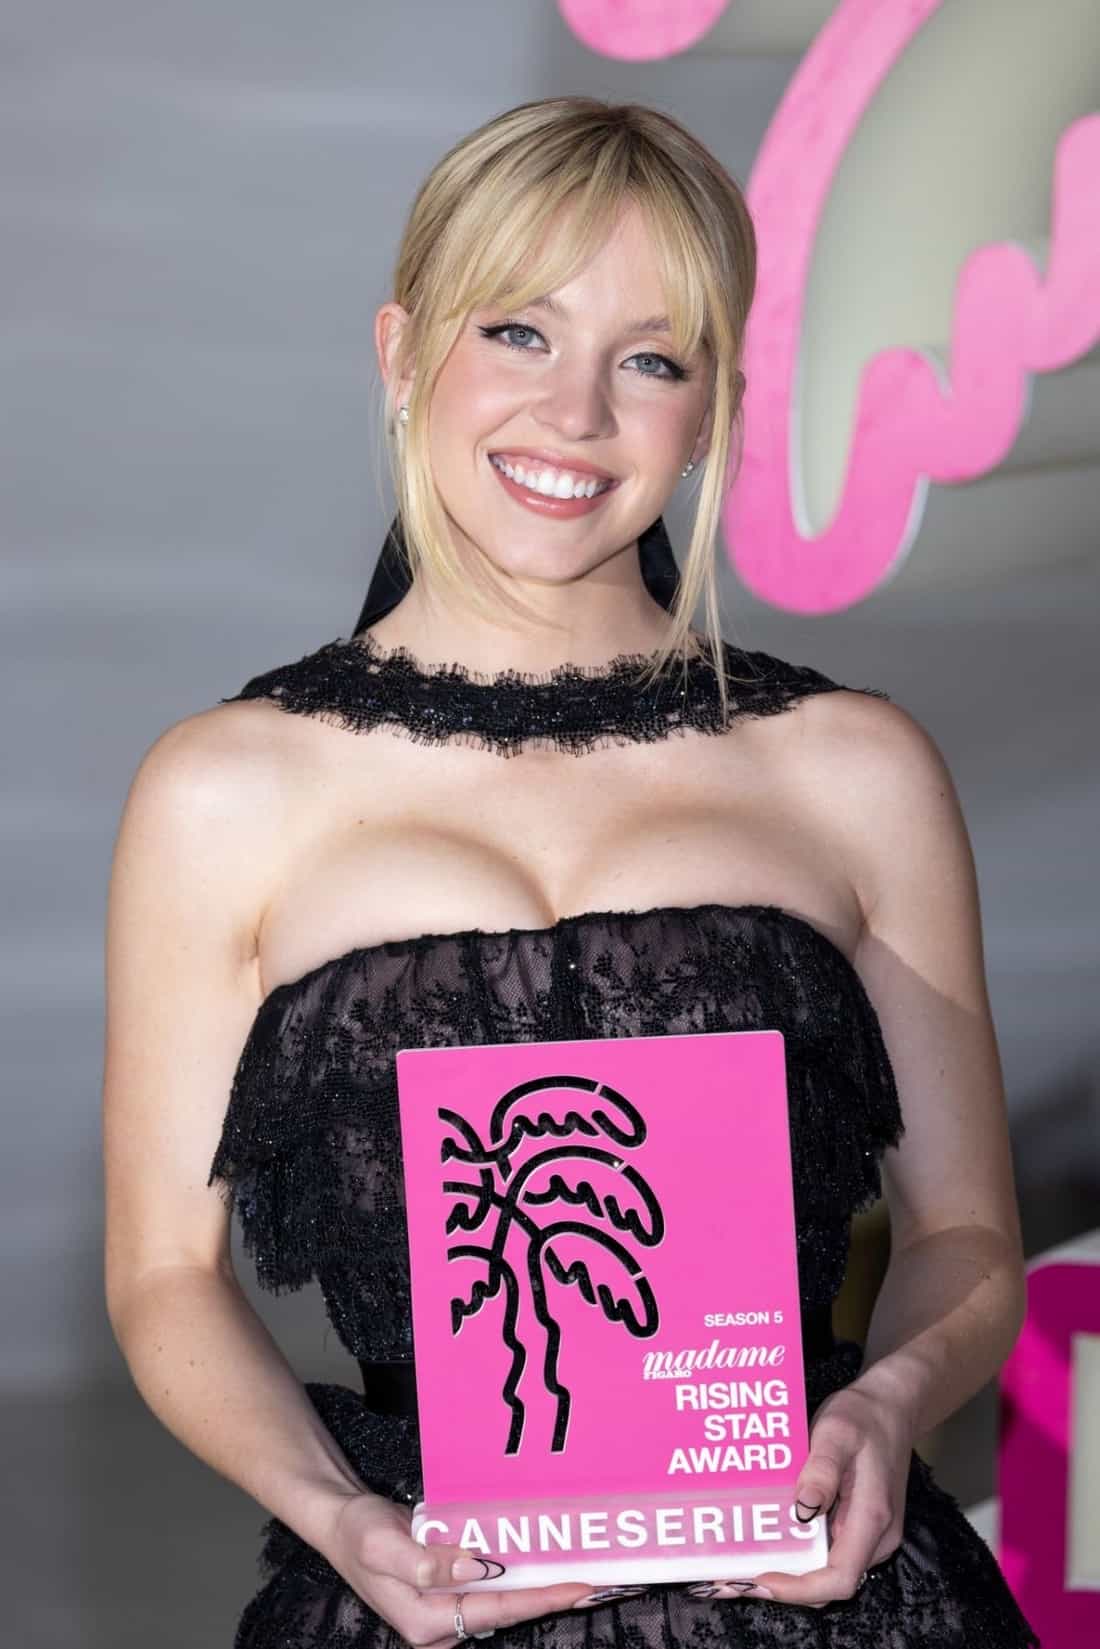 Sydney Sweeney Wore a Racy Dress at the Canneseries Festival in France